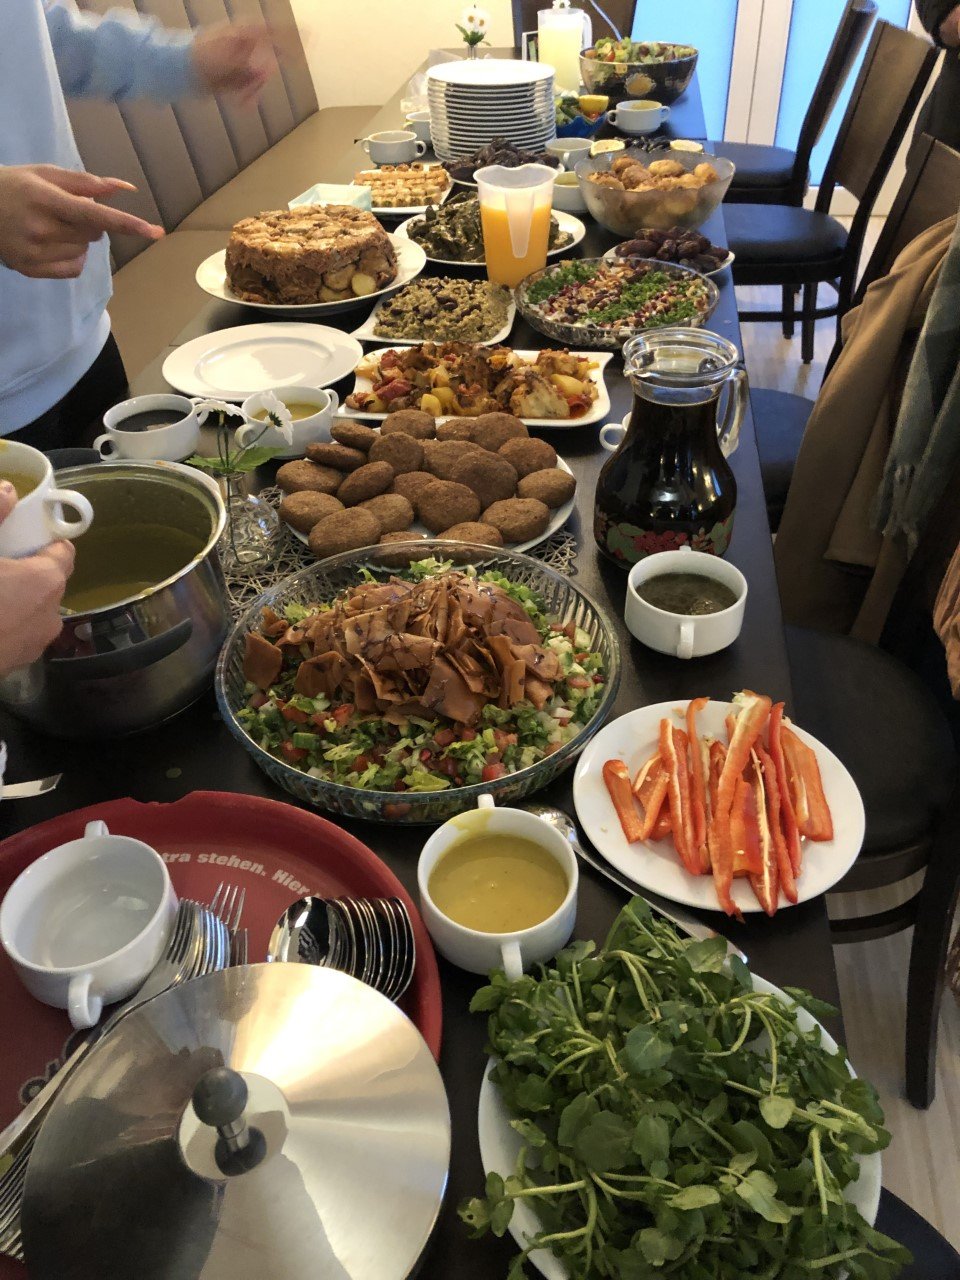 Migrants and refugees come to the SAM International cafe in the center of Sinsheim to celebrate Iftar or the breaking of the Muslim Ramadan fast with traditional Mideastern cuisine | Photo: Courtesy of SAM International.